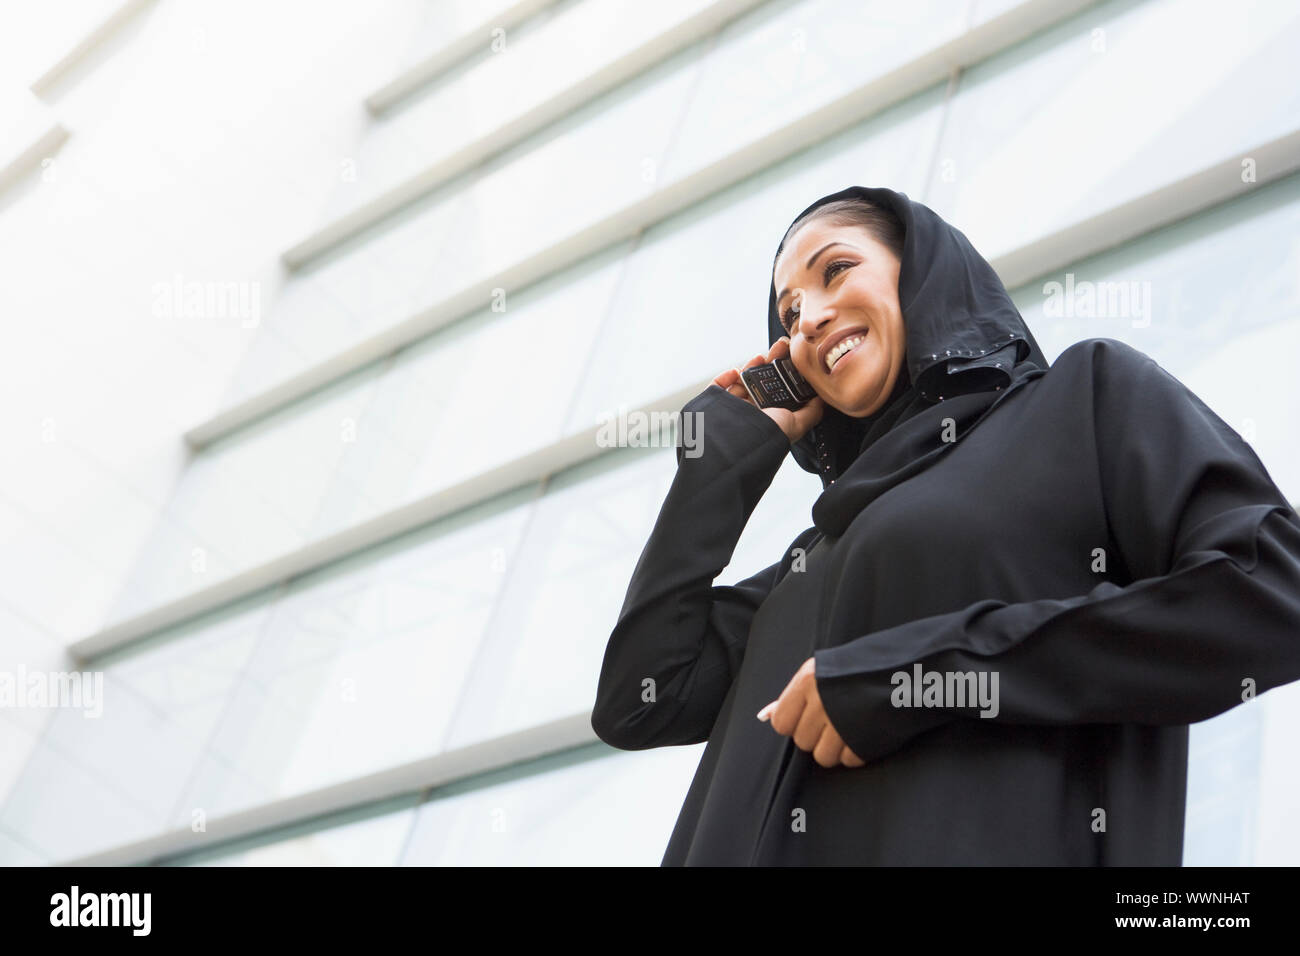 Businesswoman outdoors by building using personal digital assistant and smiling Stock Photo